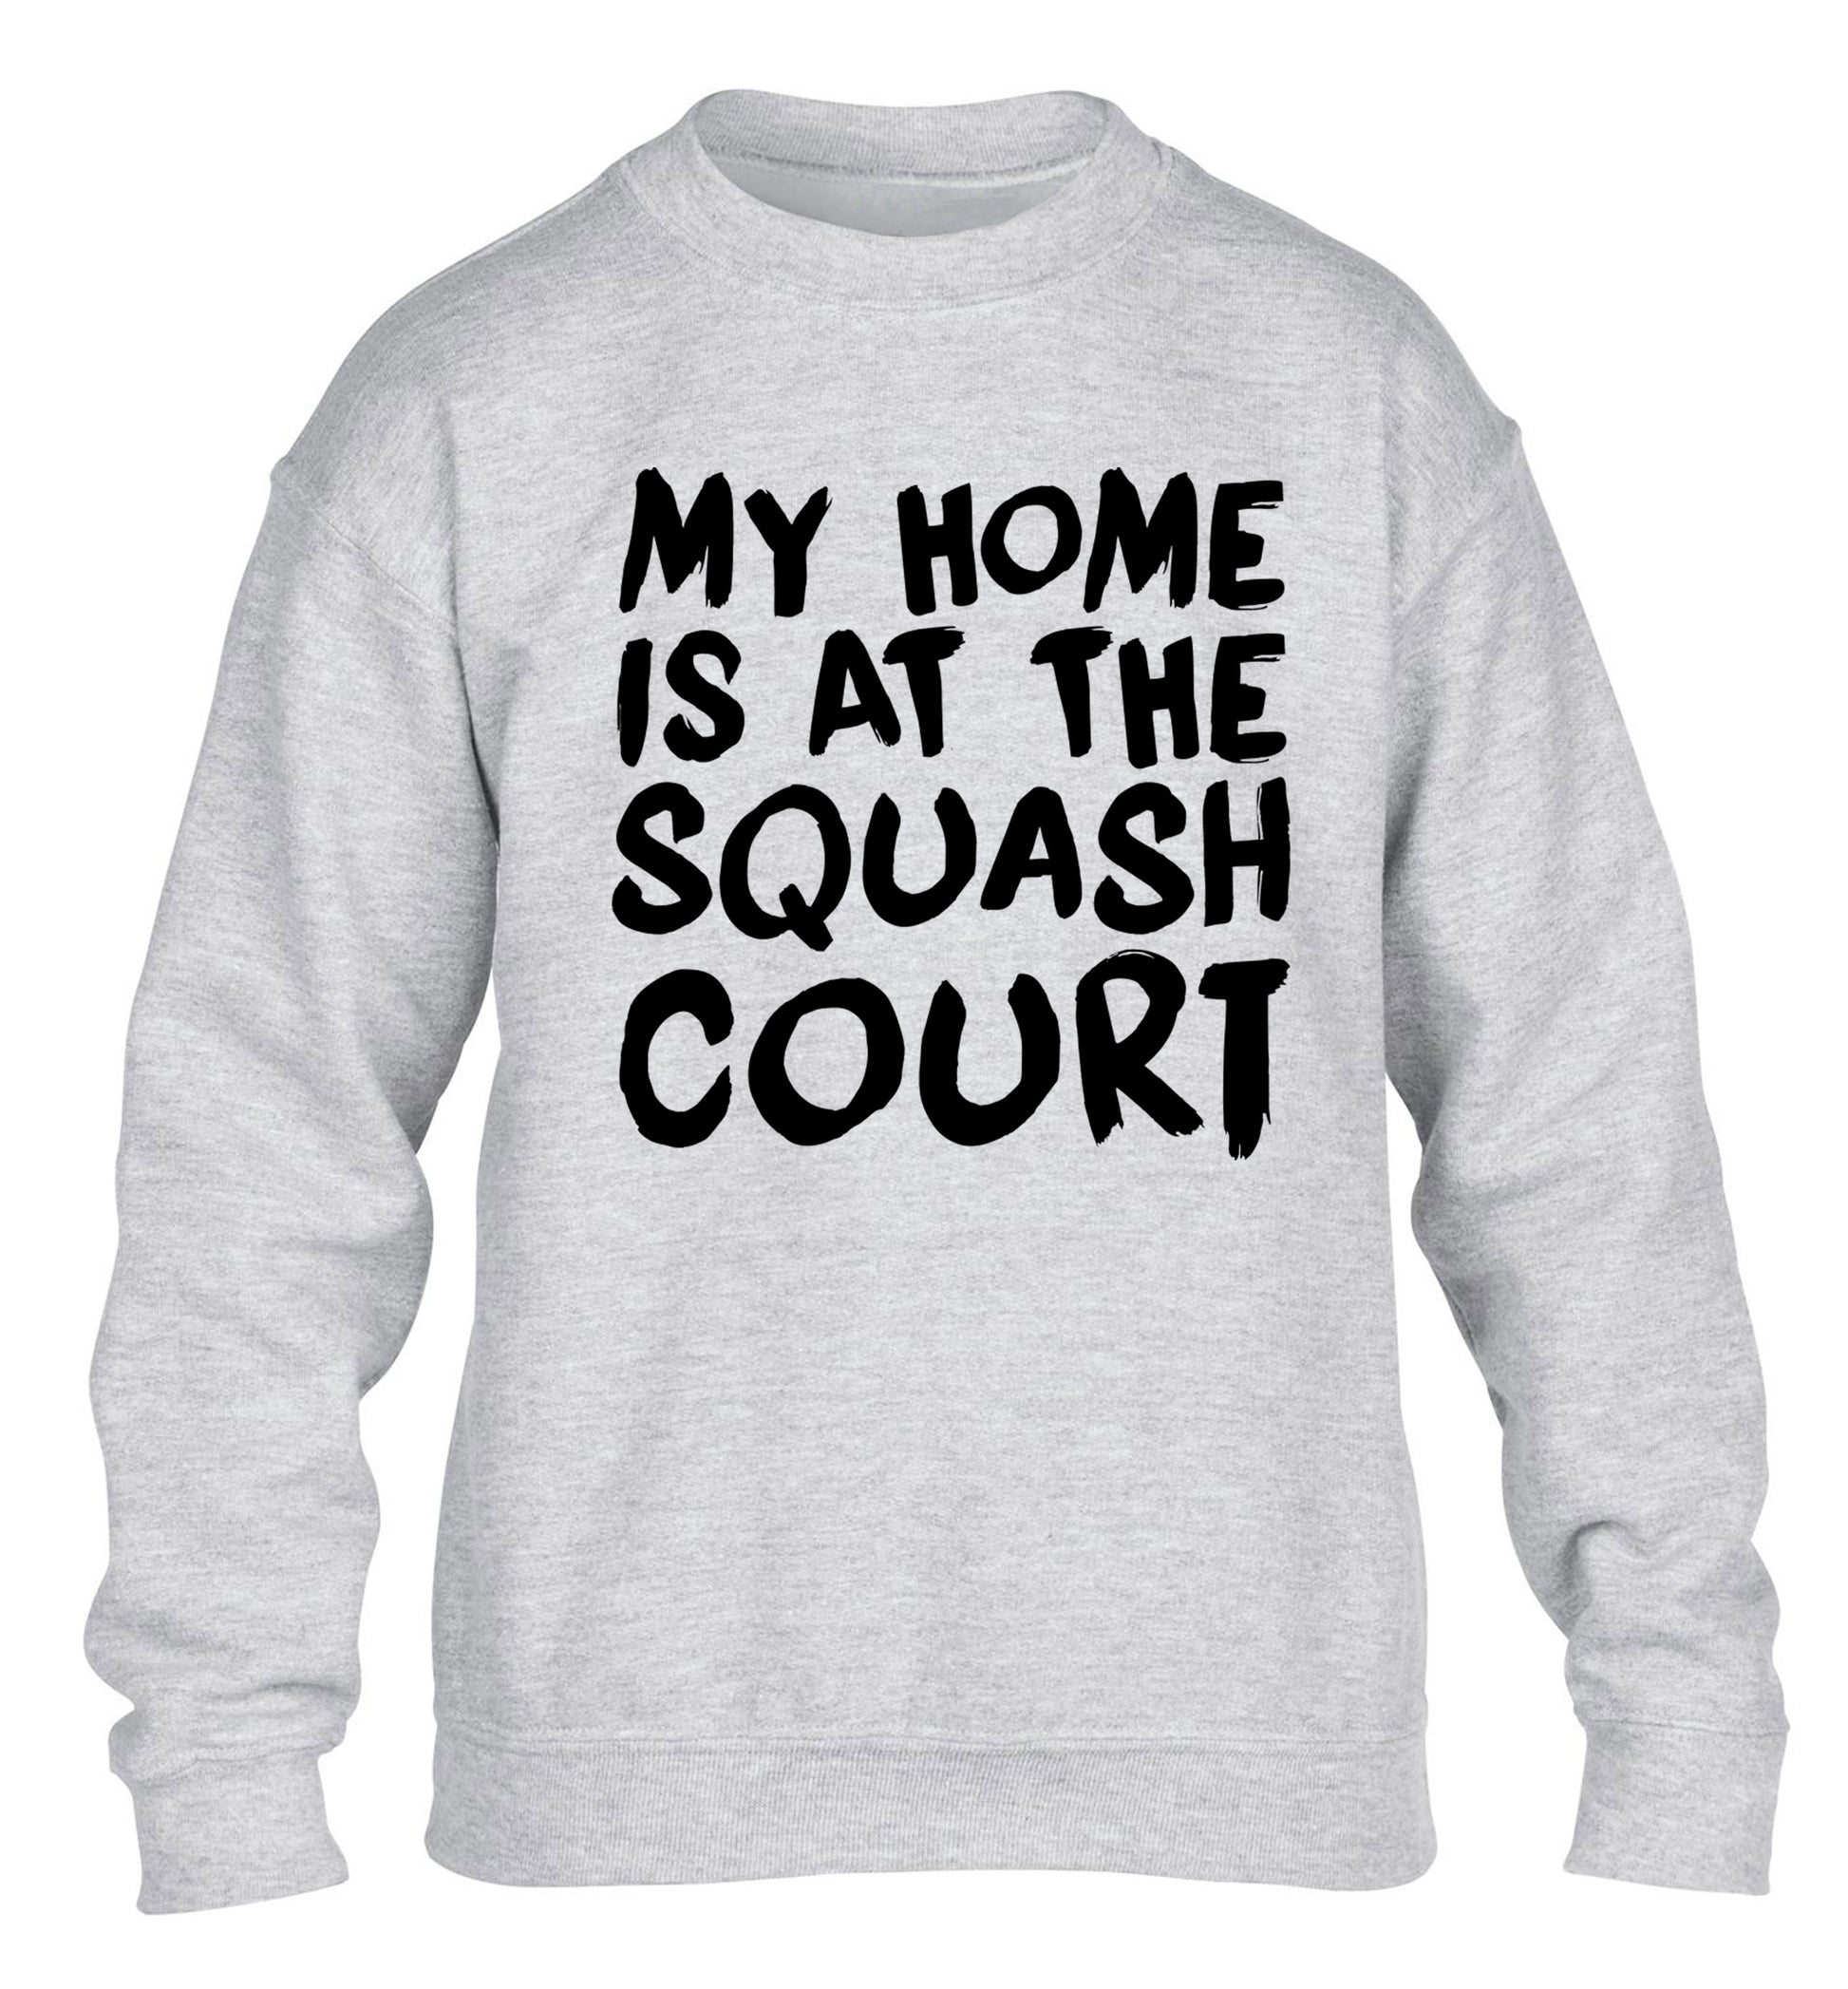 My home is at the squash court children's grey sweater 12-14 Years